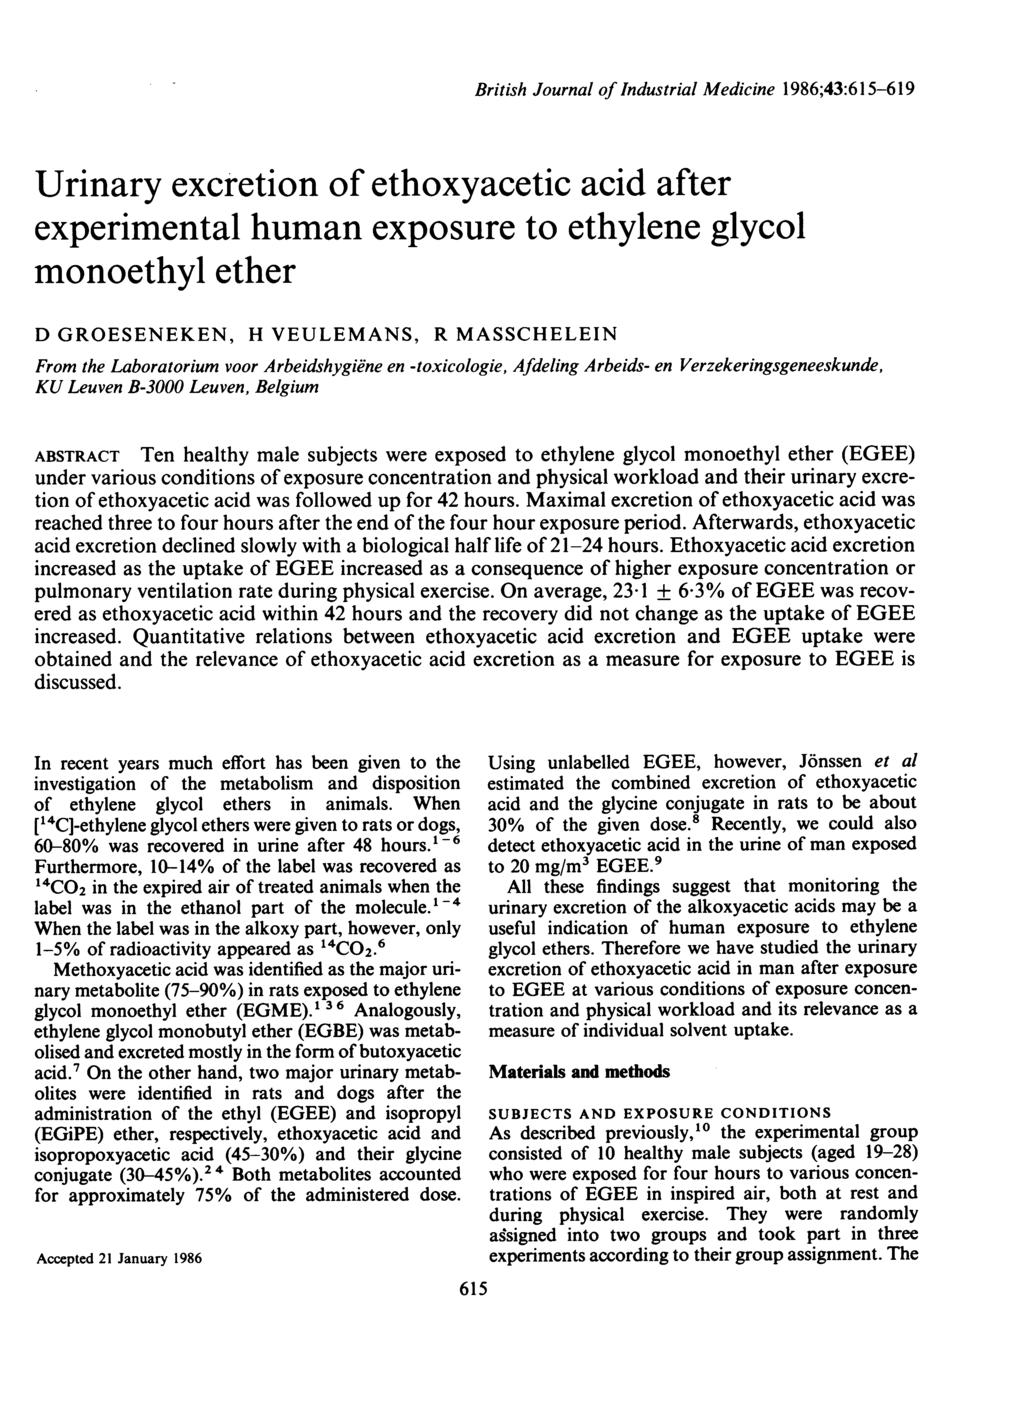 British Journal of Industrial Medicine 1986;43:615-619 Urinary excretion of ethoxyacetic acid after experimental human exposure to ethylene glycol monoethyl ether D GROSNKN, H VULMNS, R MSSCHLIN From